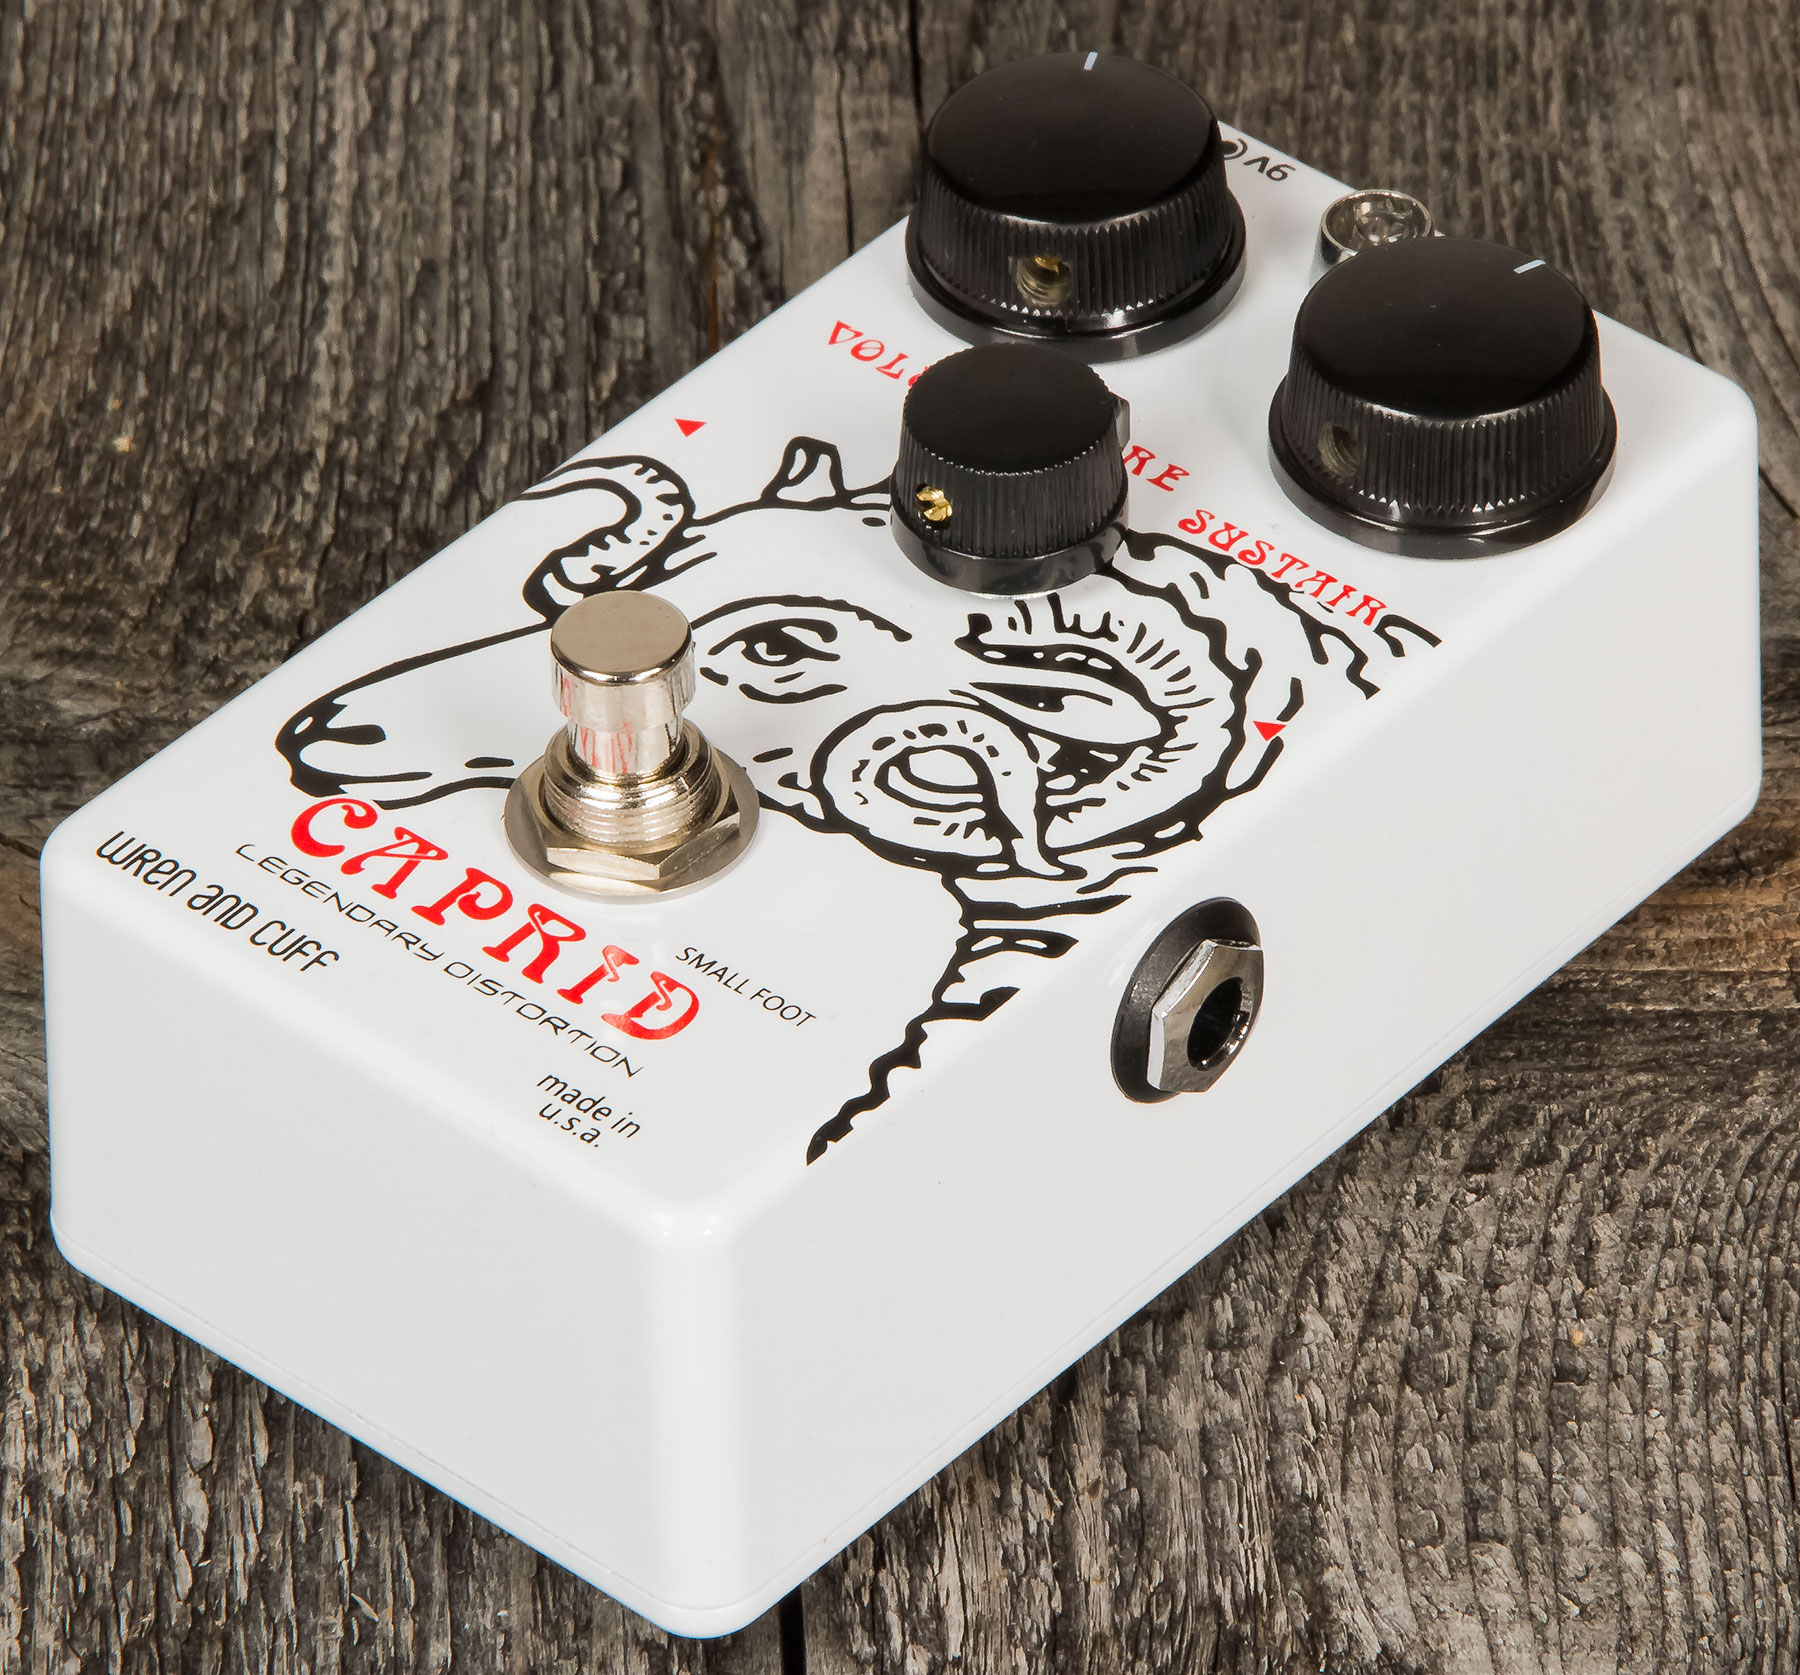 Wren And Cuff Caprid Small Foot Legendary Distortion - PÉdale Overdrive / Distortion / Fuzz - Variation 1